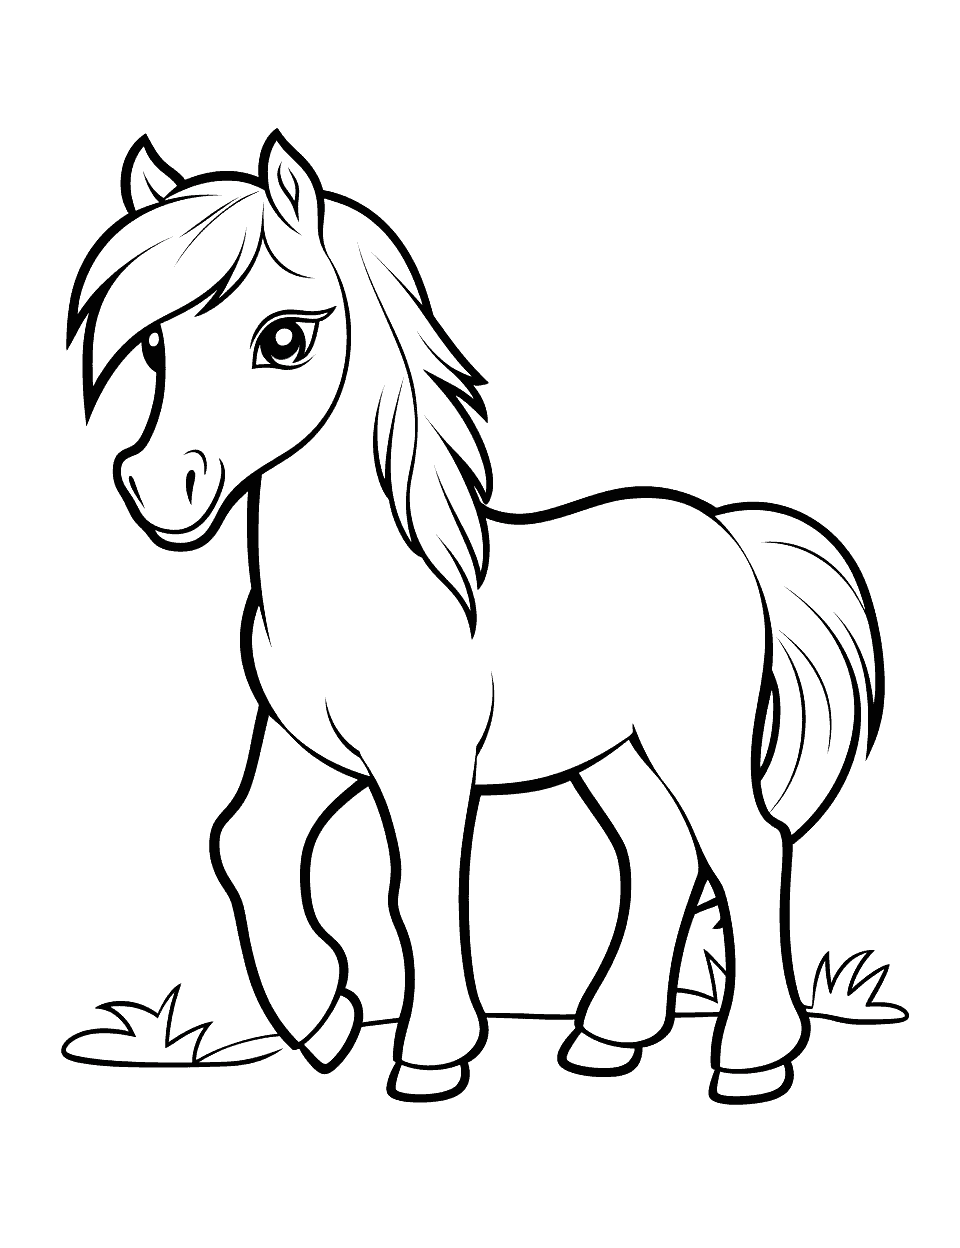 Easy Pony Outline Coloring Page - A simple and easy outline of a pony, perfect for young children.